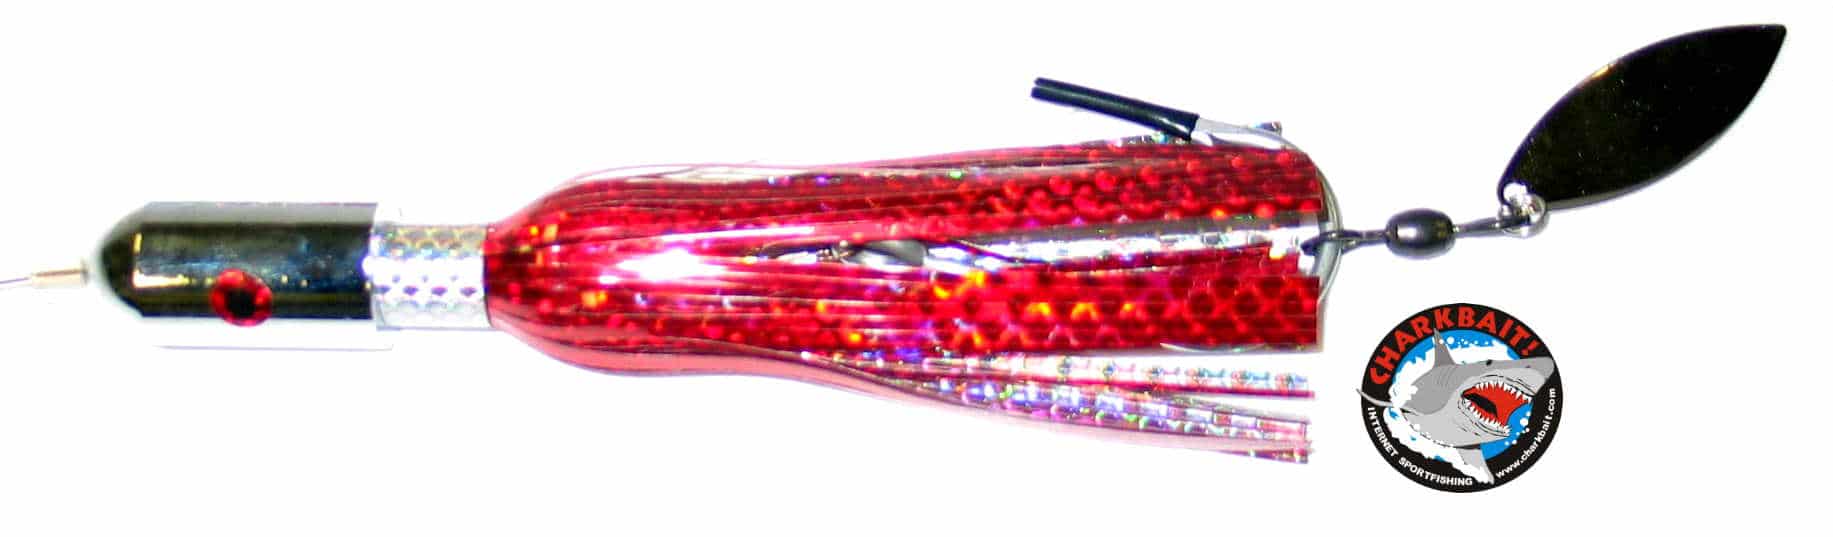 Catchy Tackle Chrome Wahoo Bomb Jigs Red